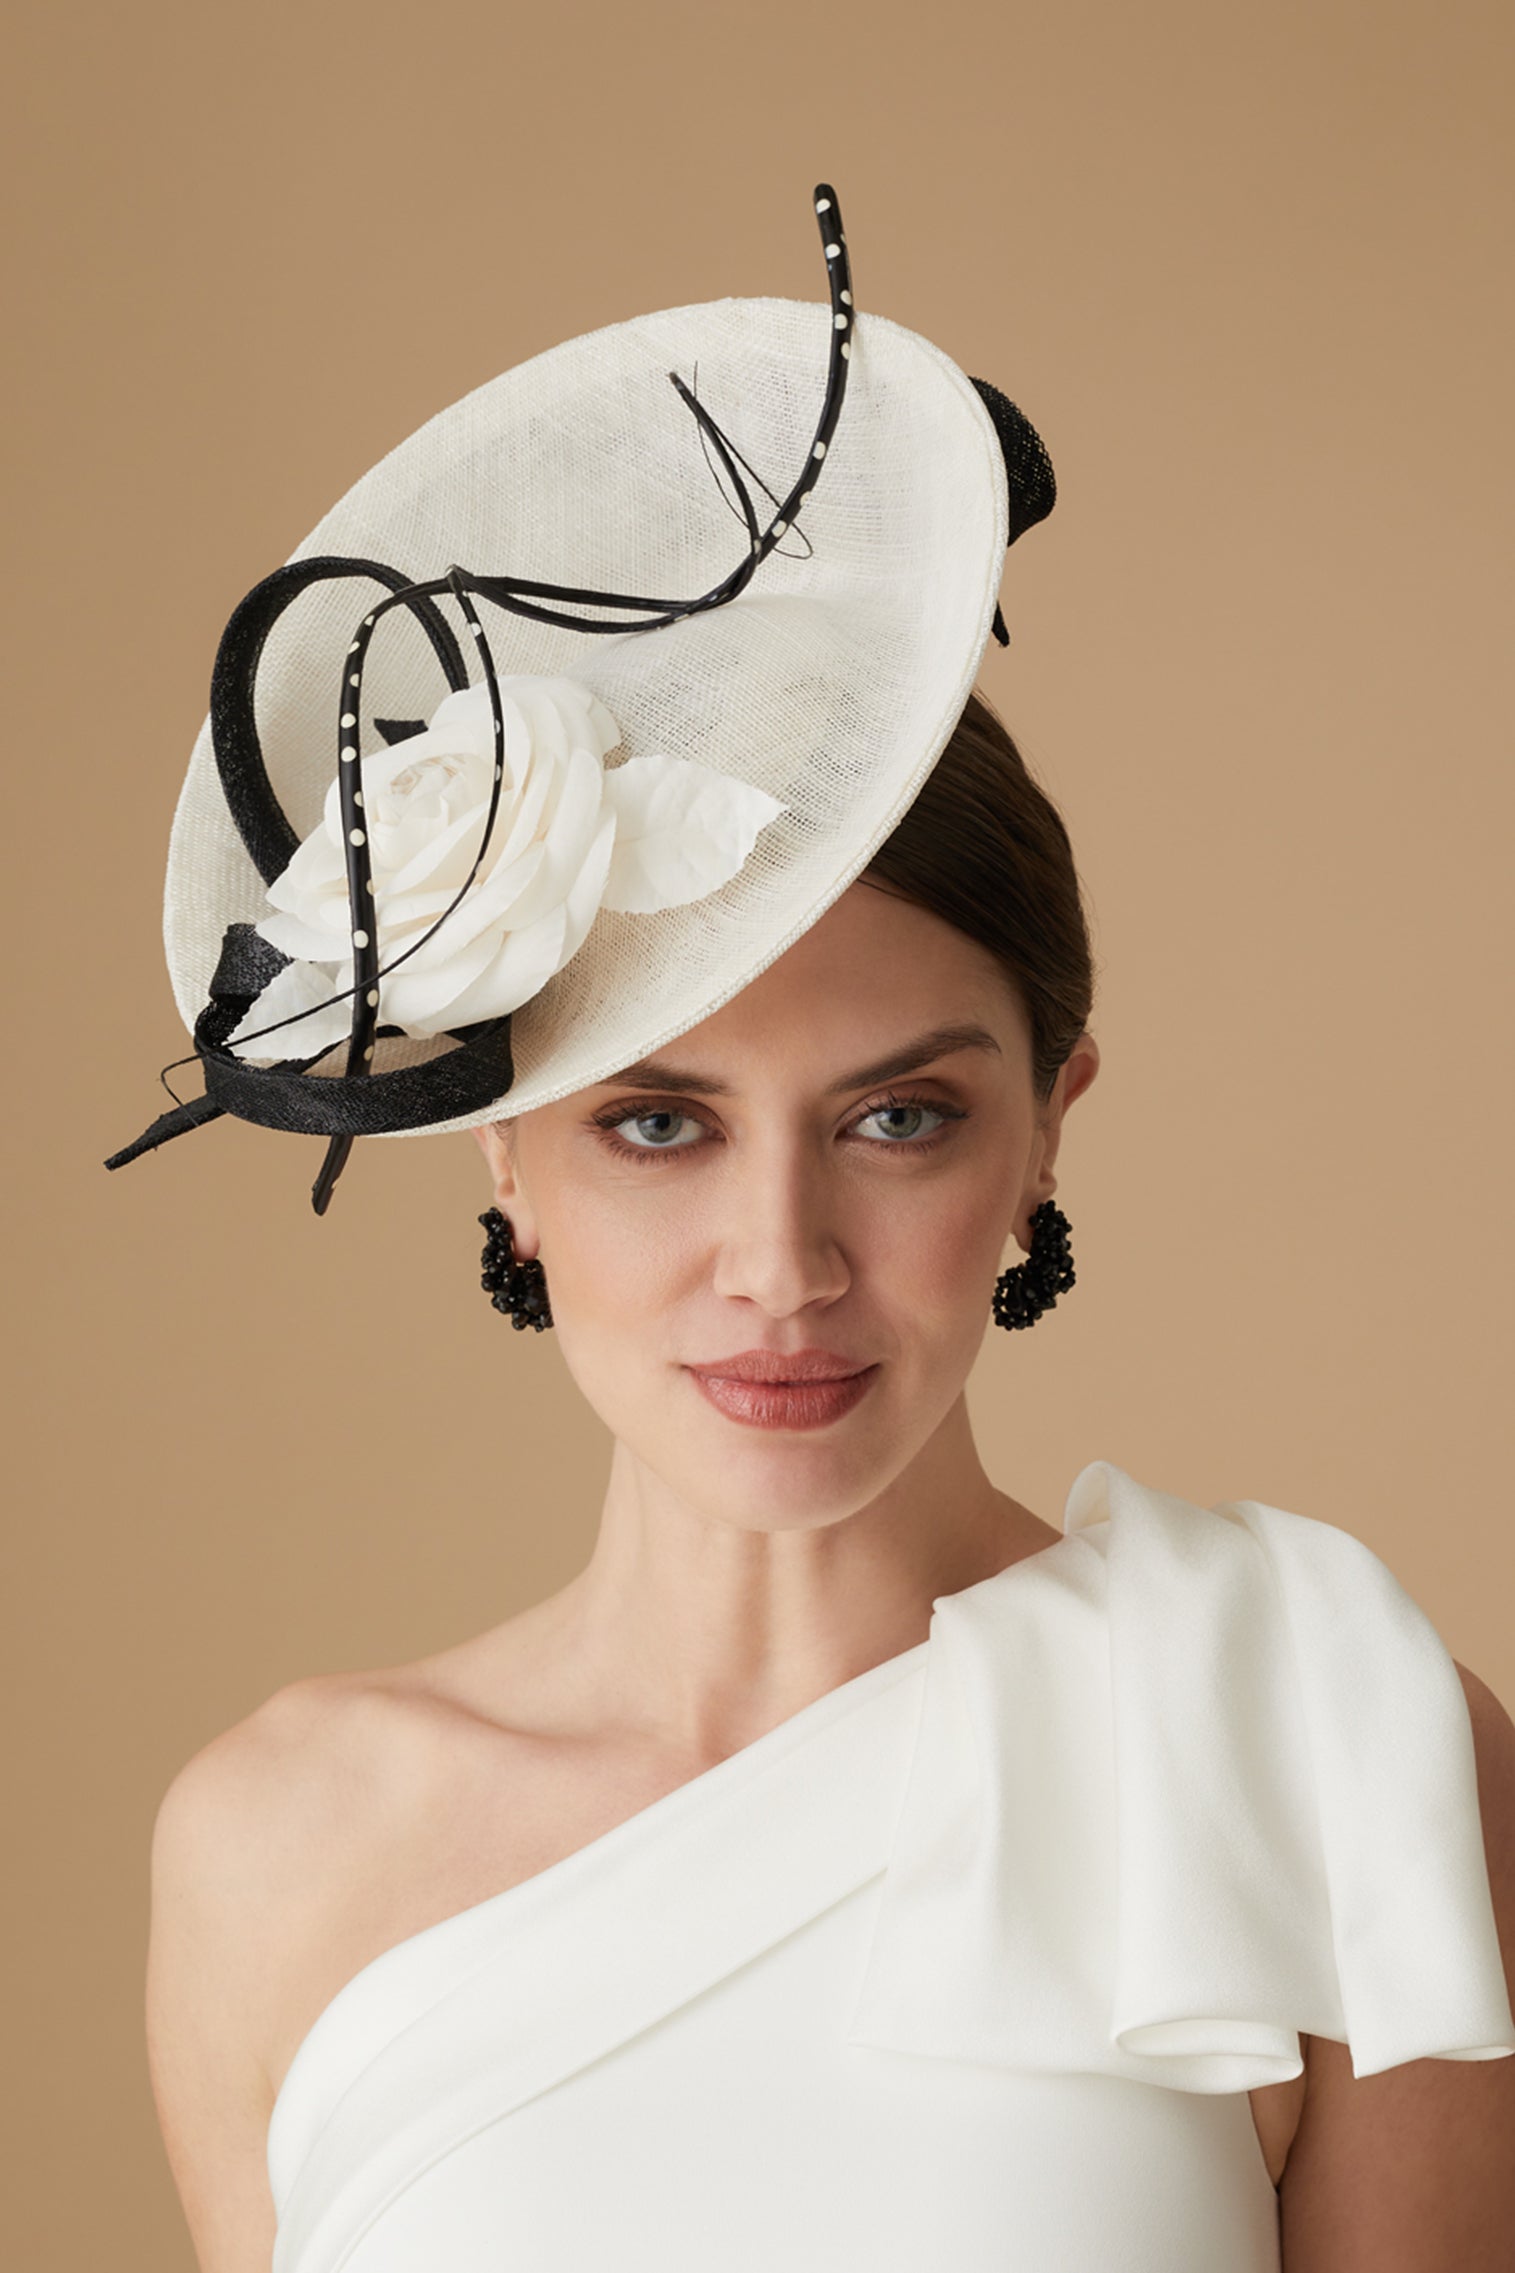 Assam White and Black Saucer Hat - Products - Lock & Co. Hatters London UK